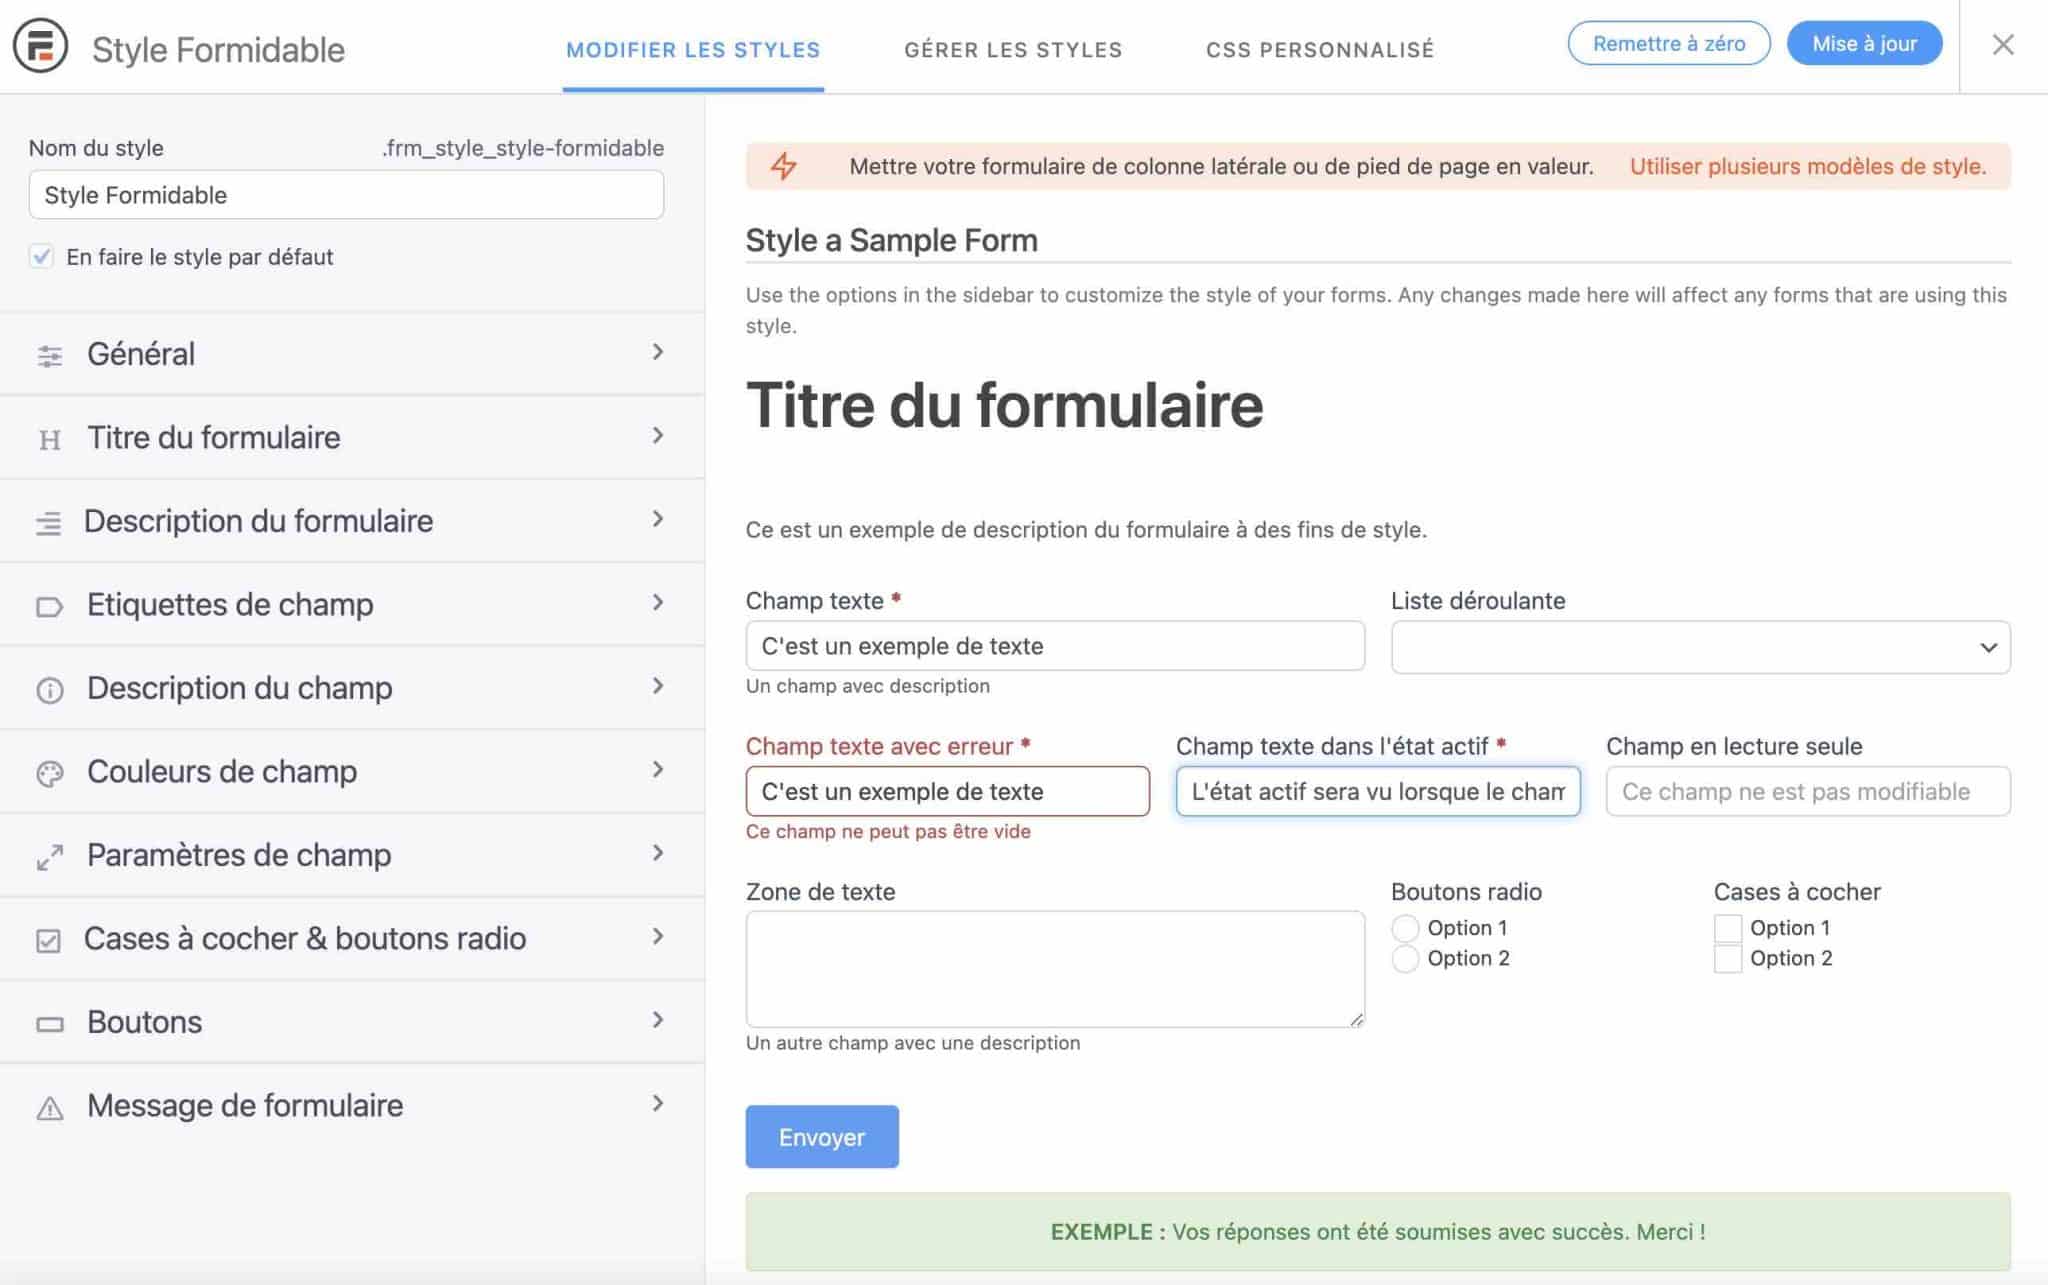 Formidable Forms offers a feature to modify the styles of a form.